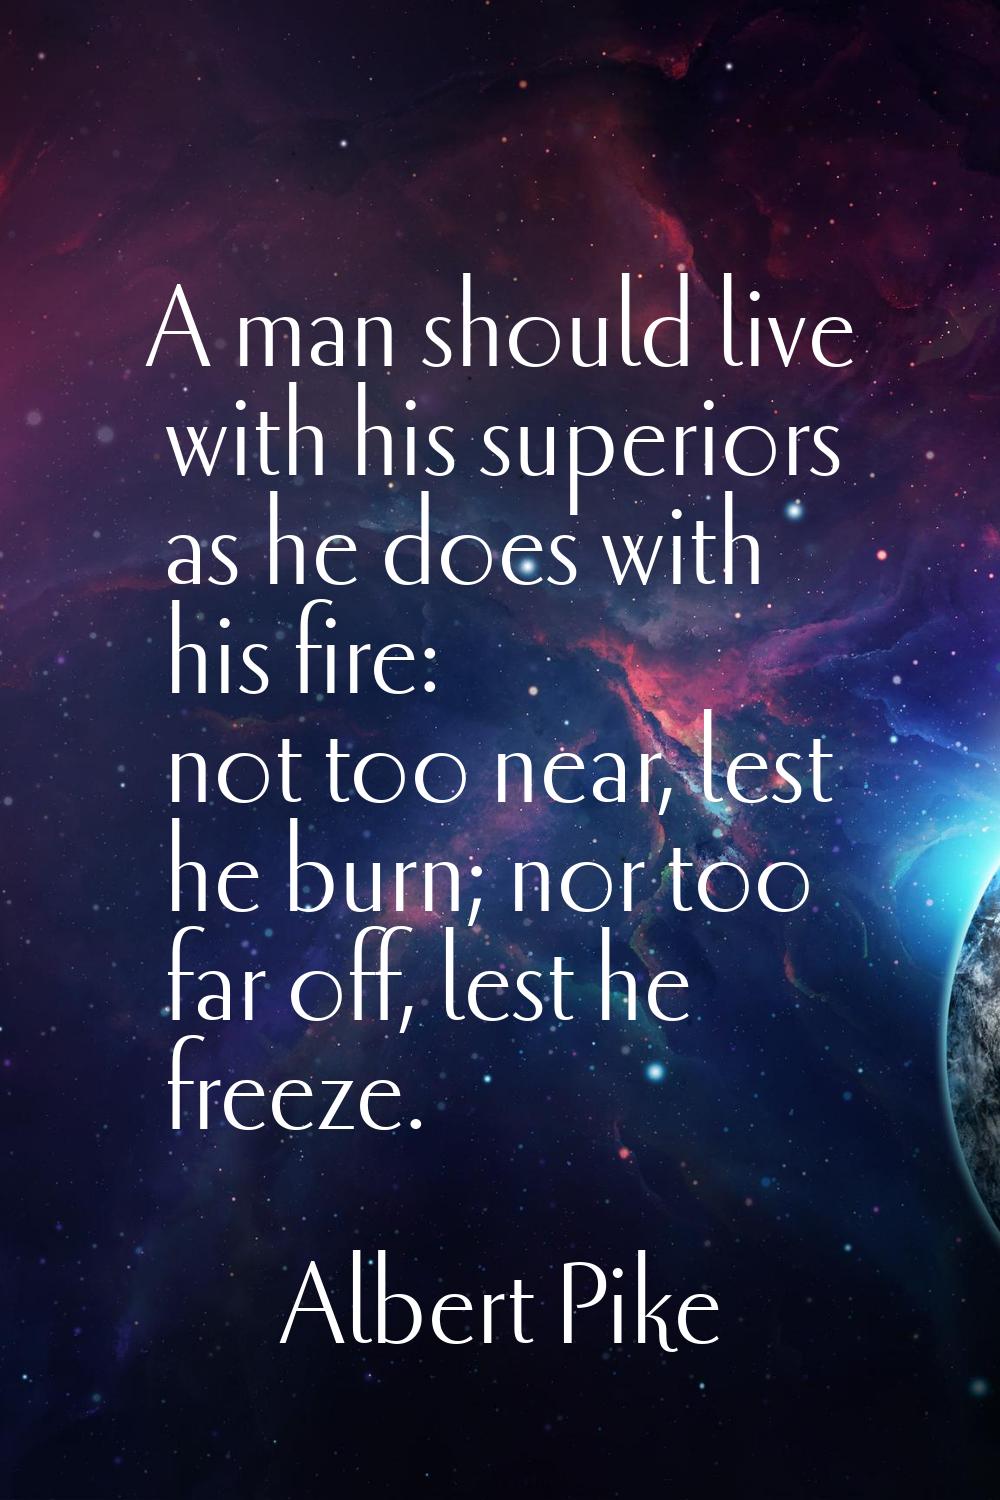 A man should live with his superiors as he does with his fire: not too near, lest he burn; nor too 